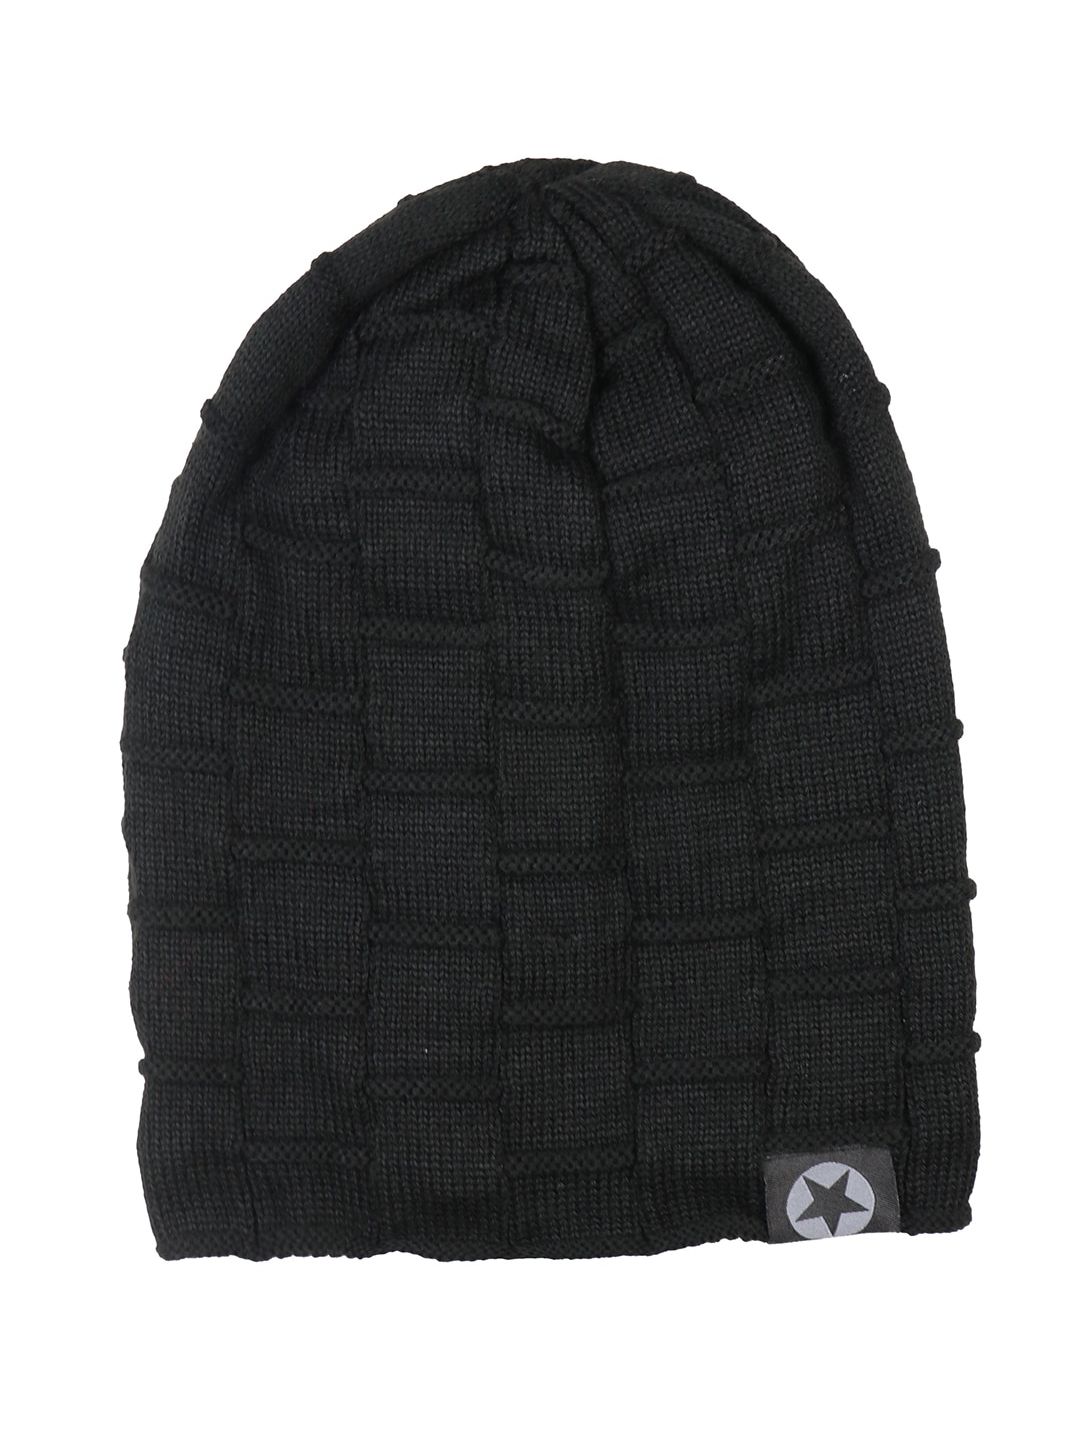 iSWEVEN Unisex Black Wool Beanie Price in India